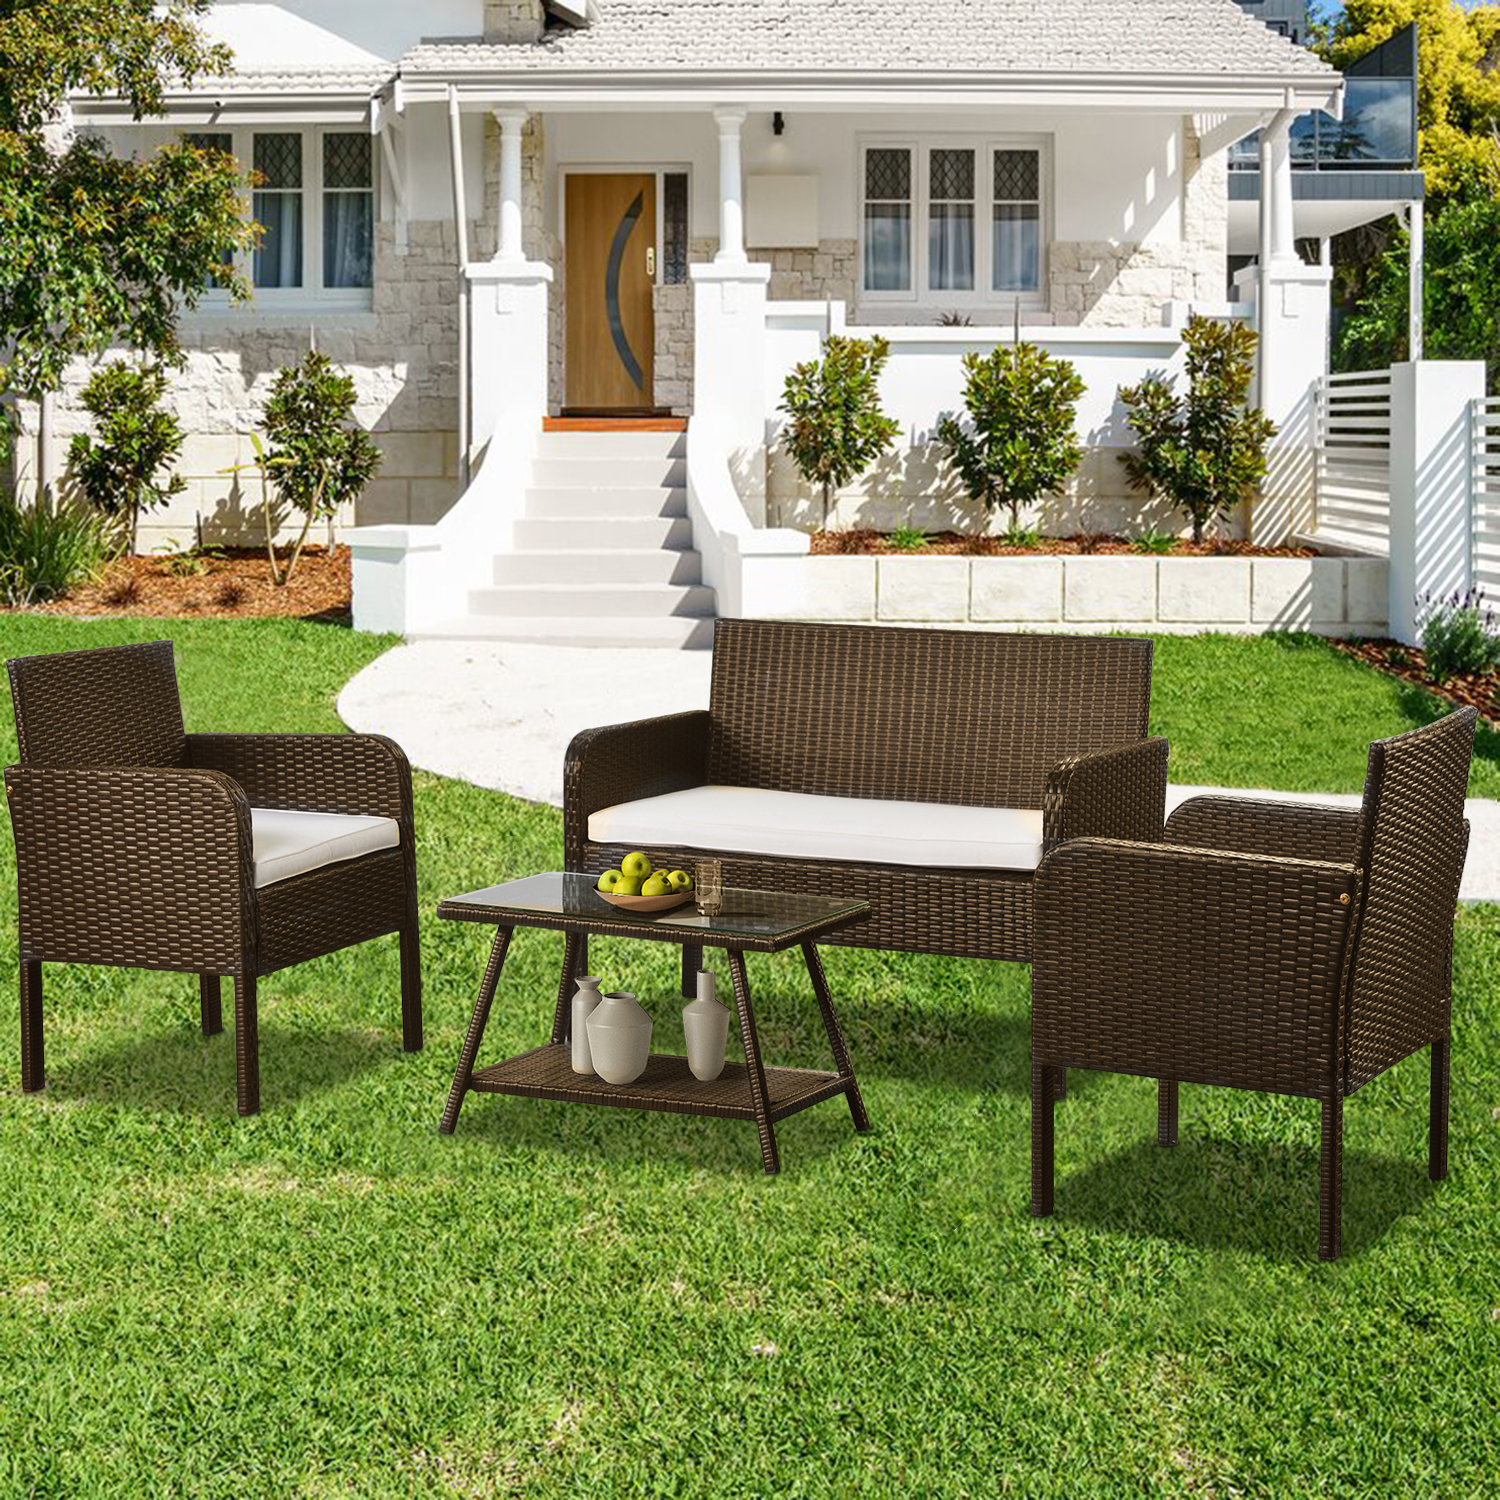 uhomepro 4 Piece Bistro Patio Set, Rattan Wicker Outdoor Patio Furniture with 2pcs Arm Chairs, 1pc Love Seat, Coffee Table Beige, Cushion, Dining Set for Backyard Poolside Garden - image 1 of 7